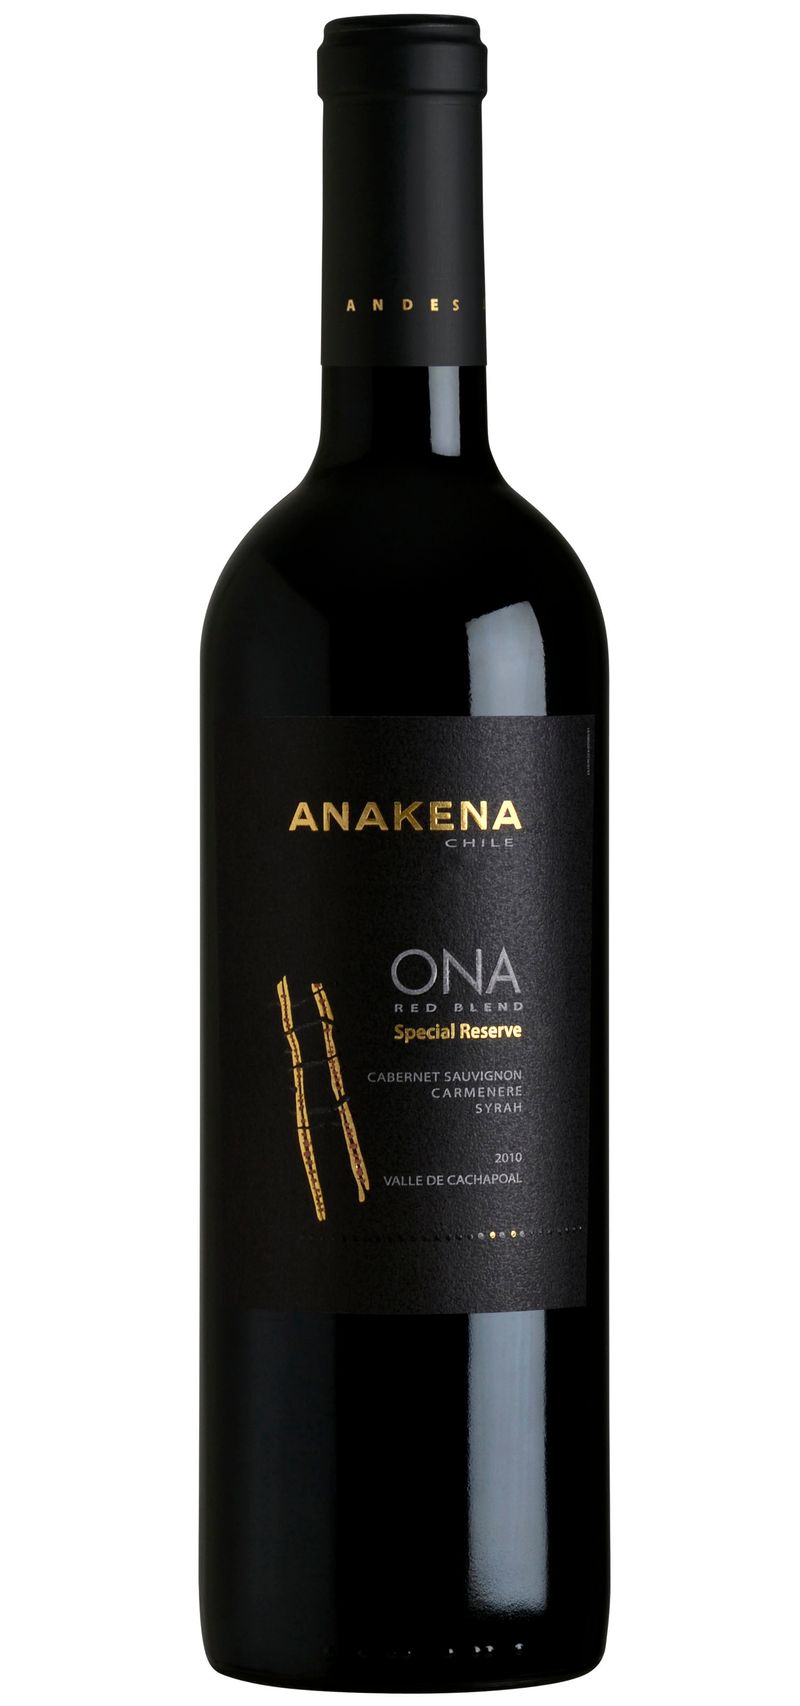 Anakena-Ona-Special-Reserve-Red-Blend-2014